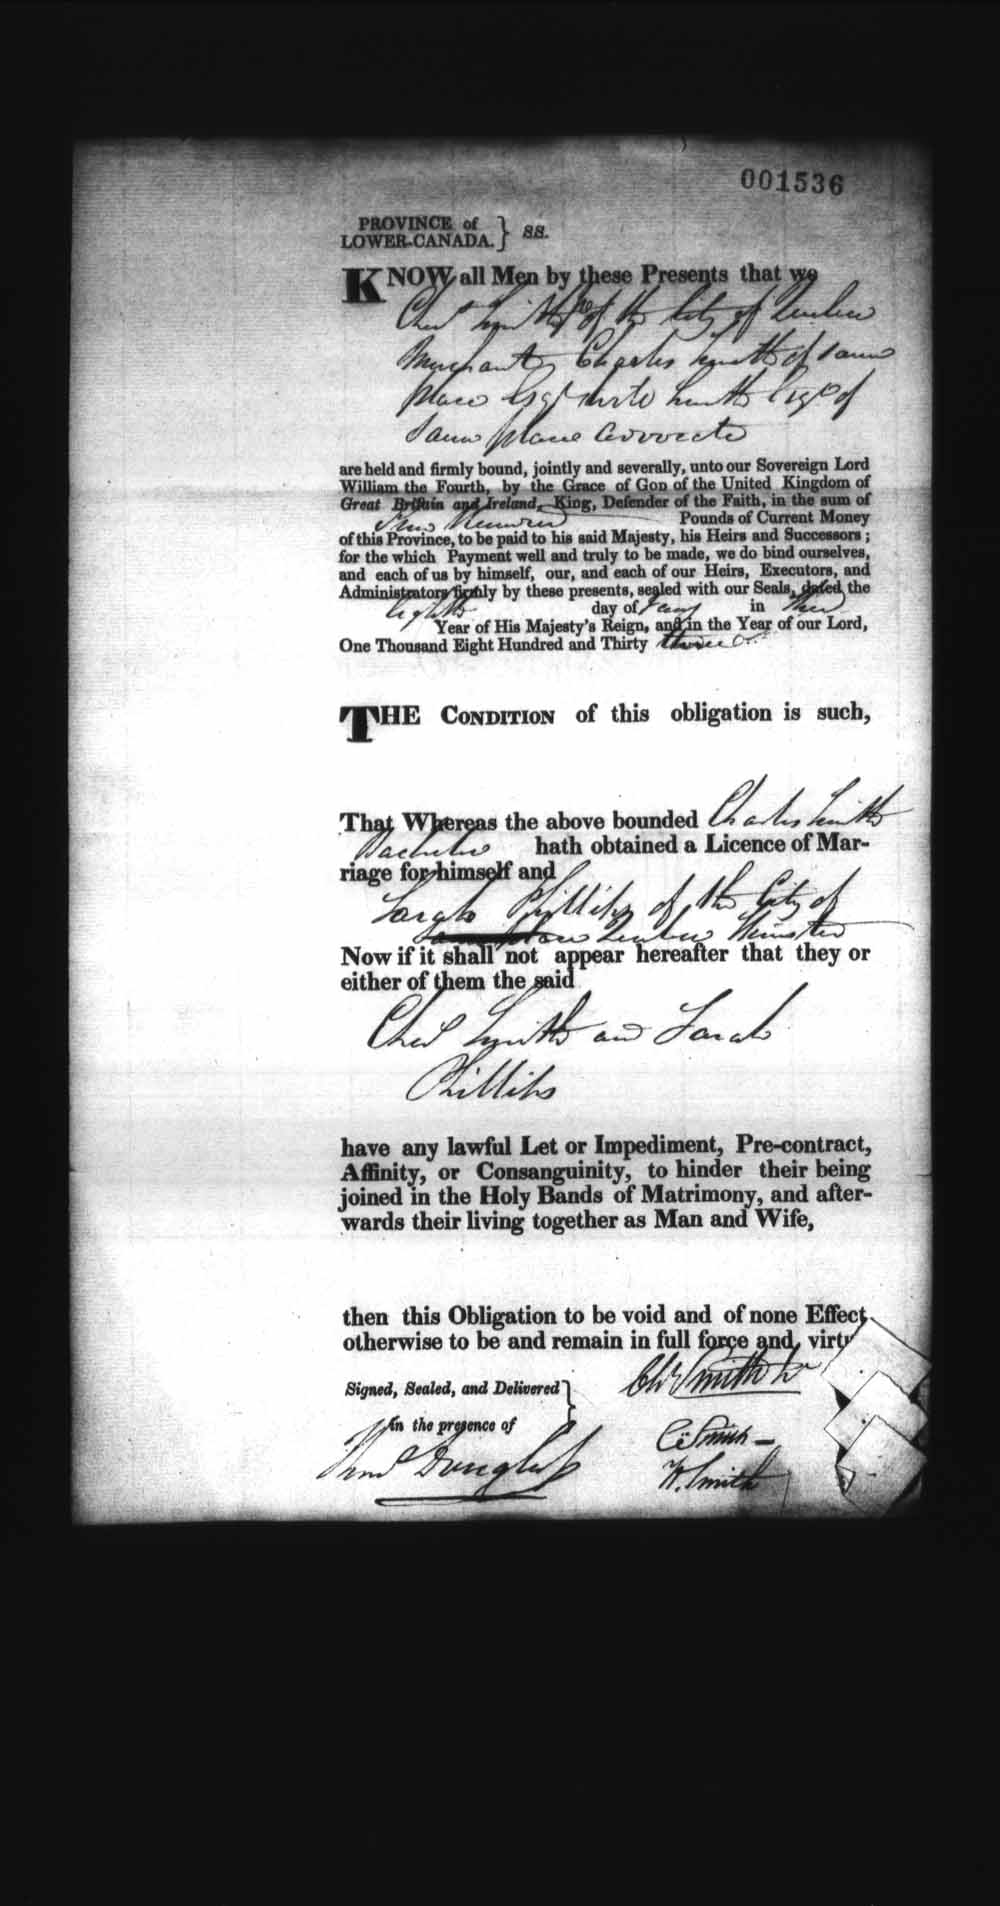 Digitized page of Upper and Lower Canada Marriage Bonds (1779-1865) for Image No.: e008237836